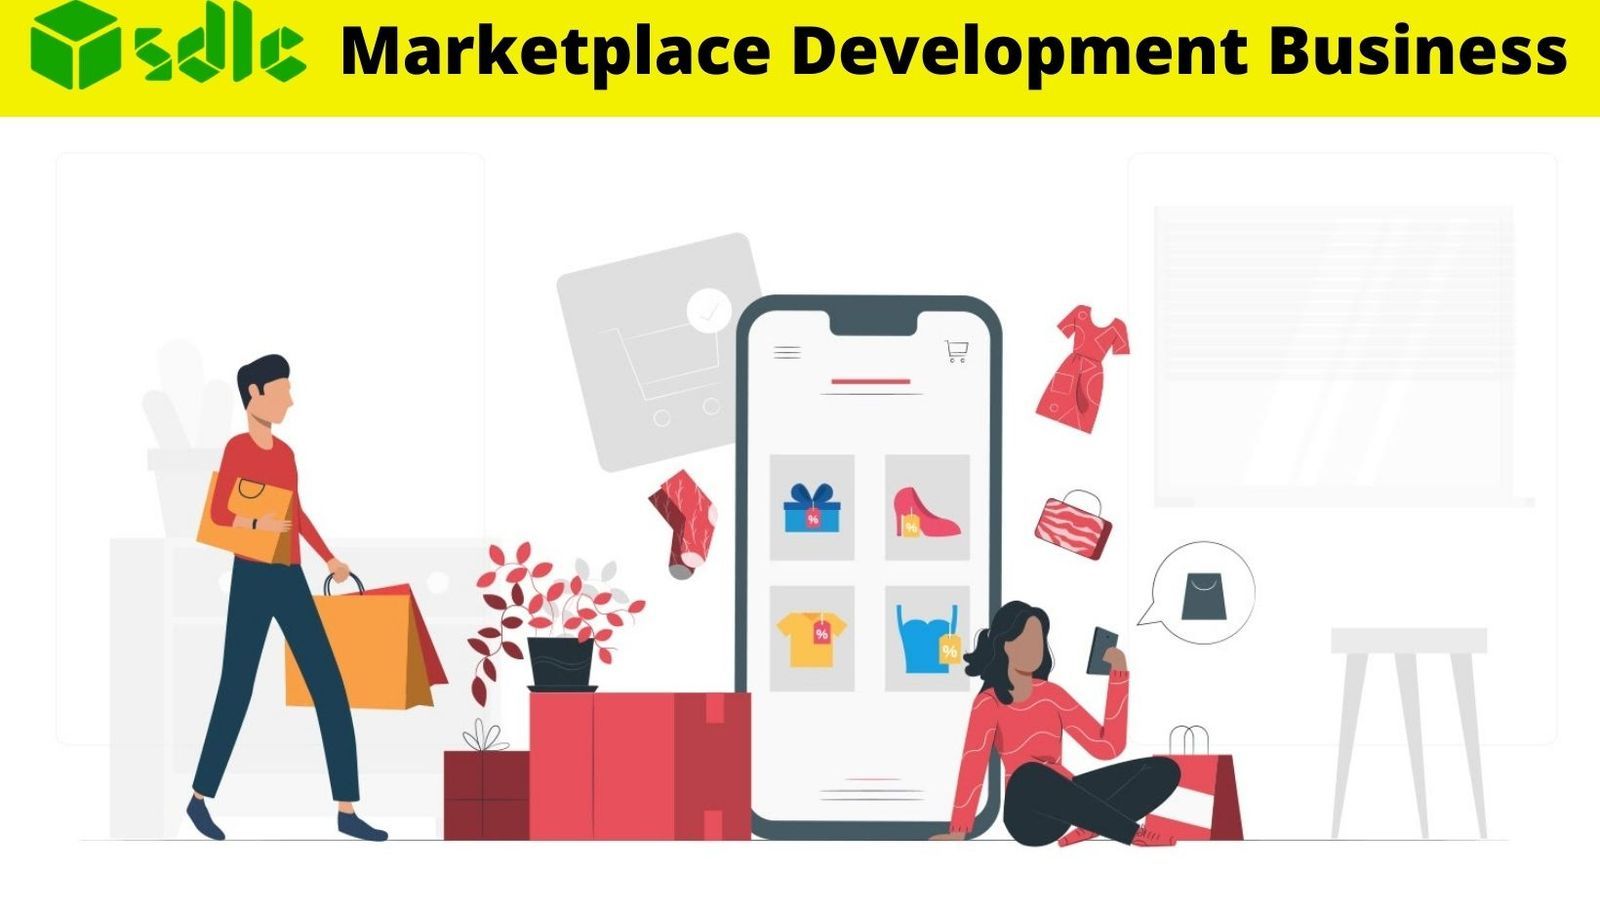 How to Start a Marketplace Development Business?